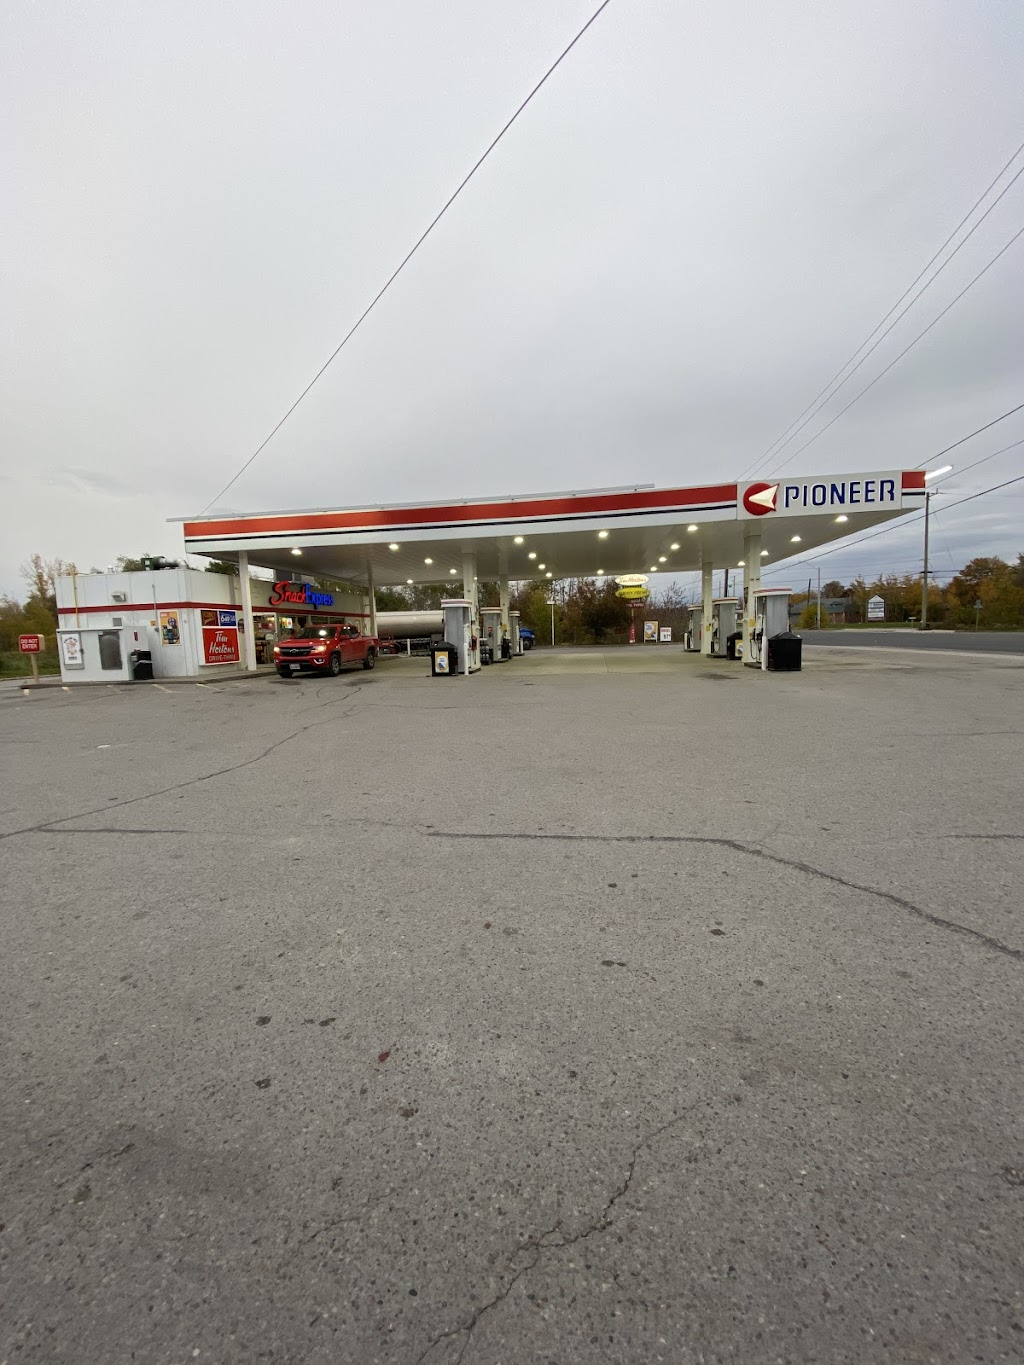 Pioneer - Gas Station | convenience store | 336 Lansdowne St E, Peterborough, ON K9L 0B2, Canada | 7057421156 OR +1 705-742-1156